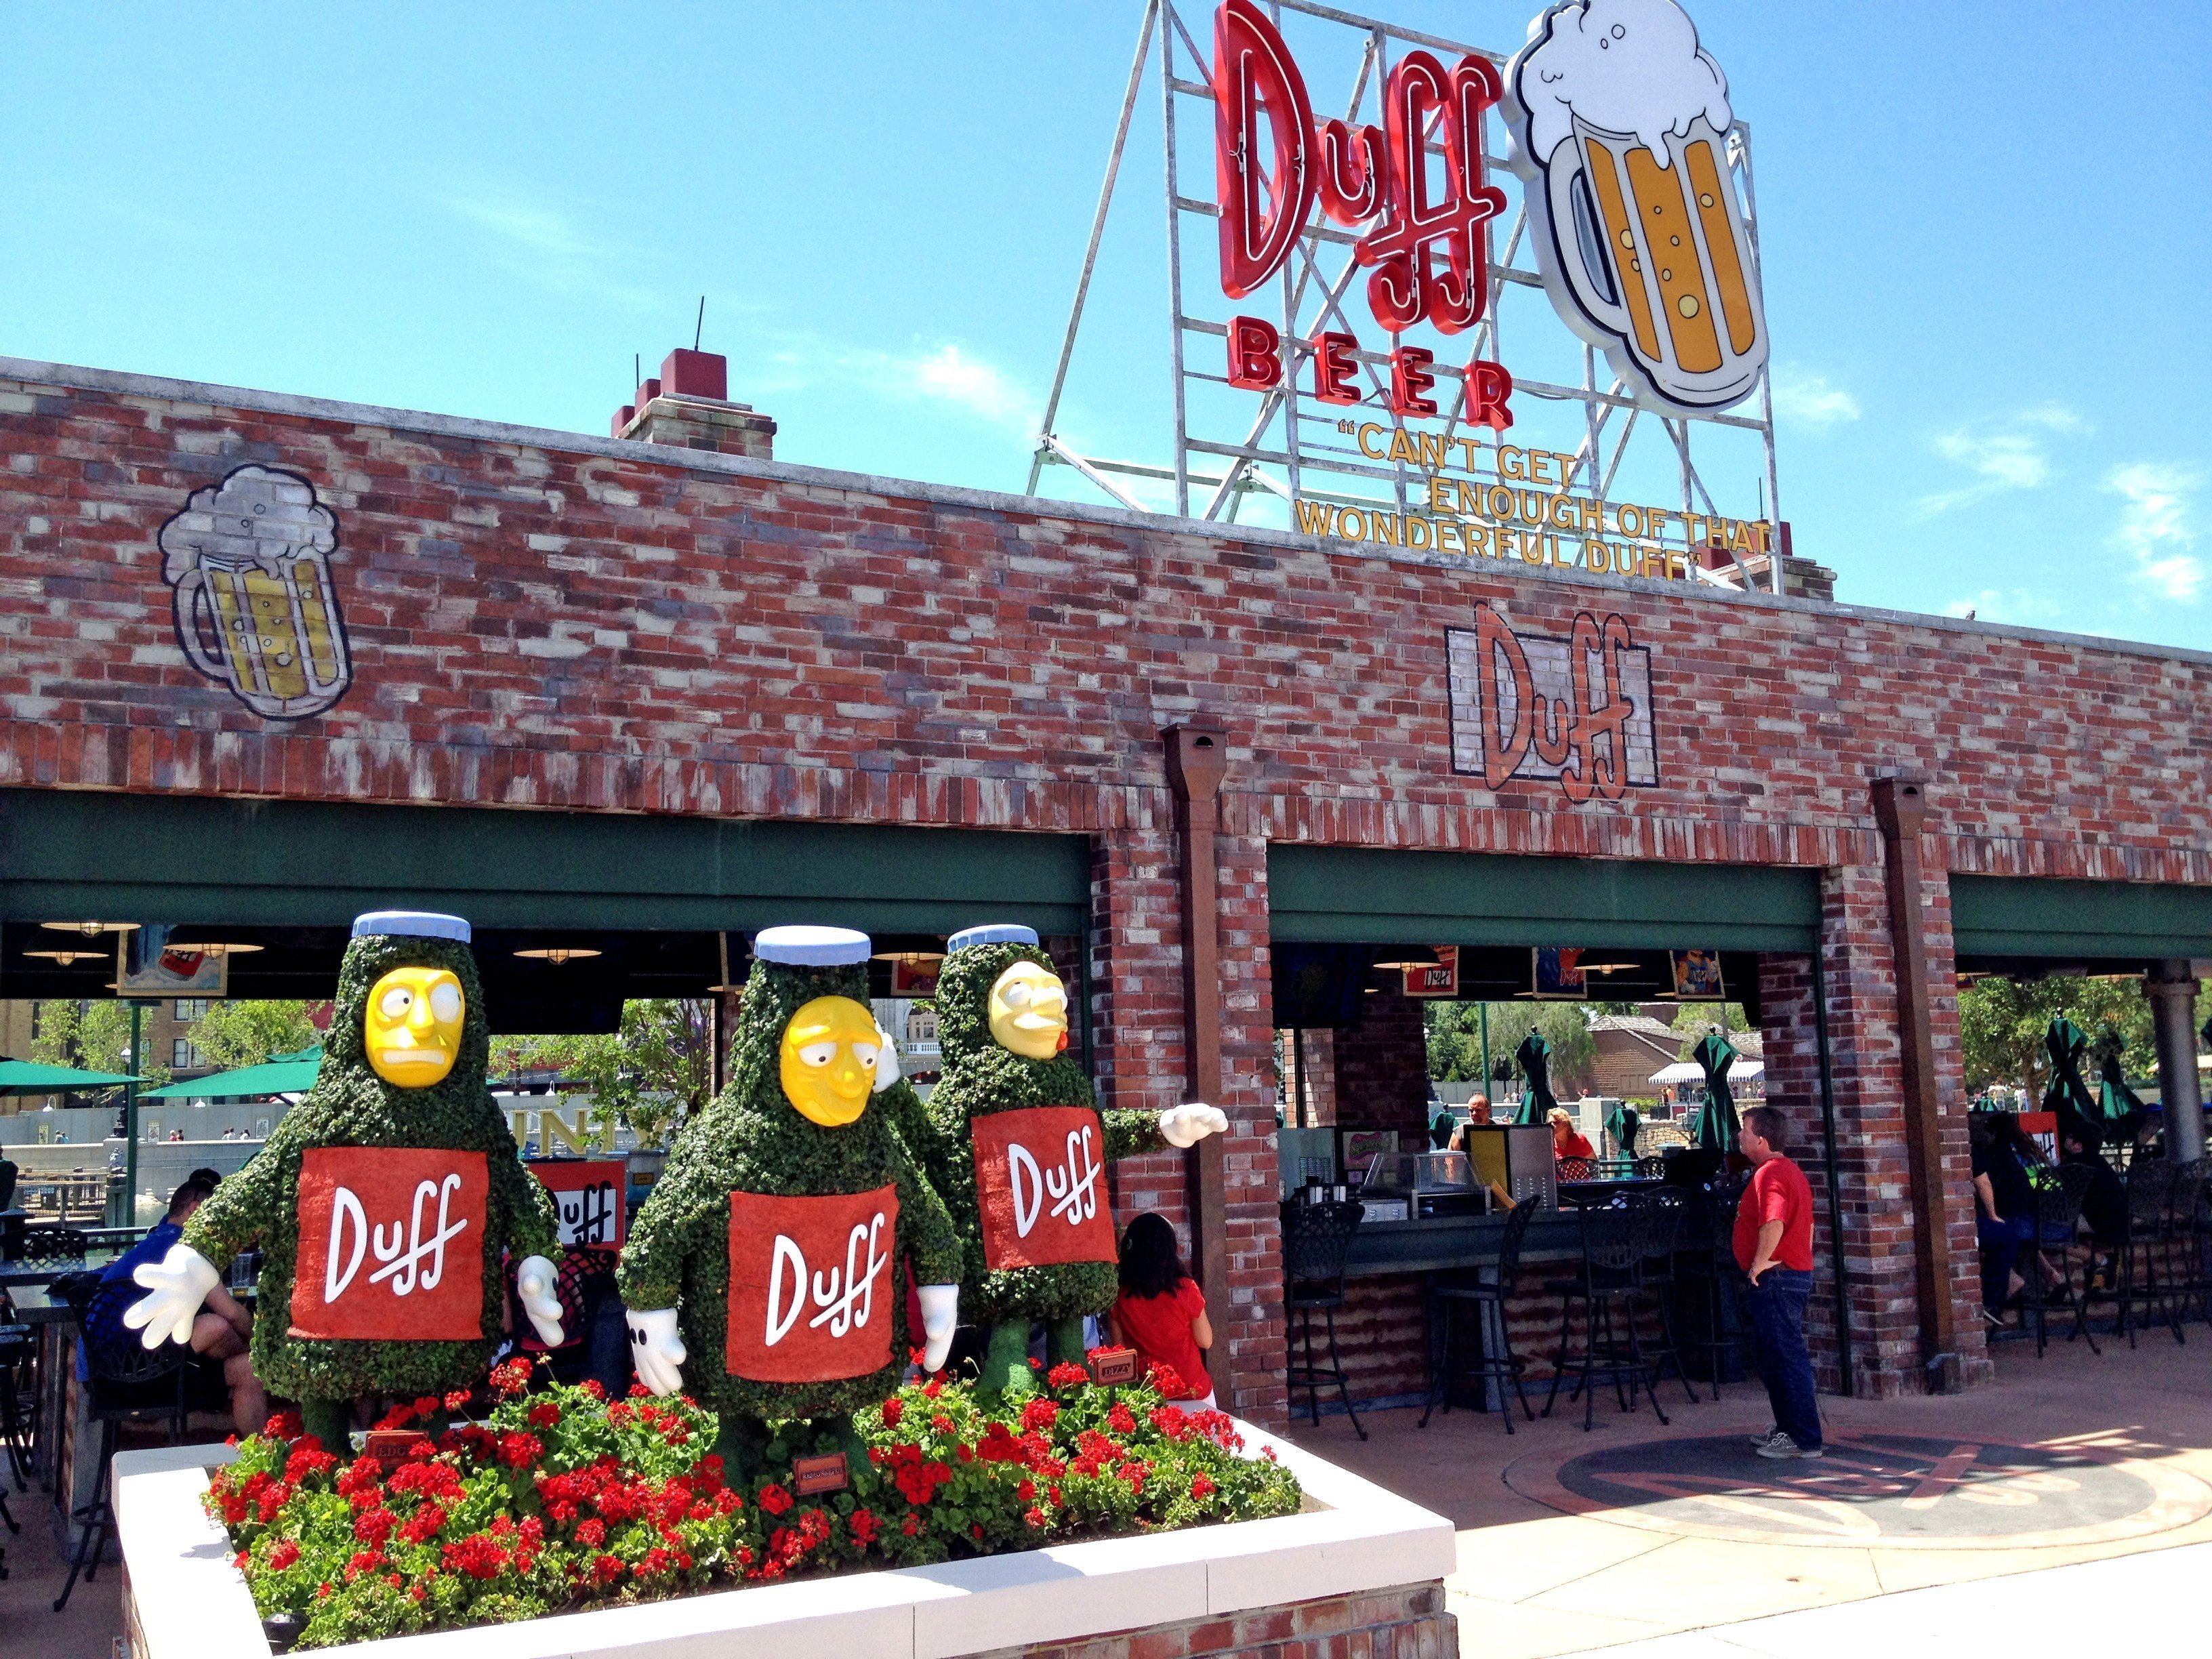 Homer’s favorite Beer, Duff, is available at the ‘brewery’ in the Springfield area of Universal Studios in Orlando, Fla. (Miami Herald&mdash;MCT via Getty Images)